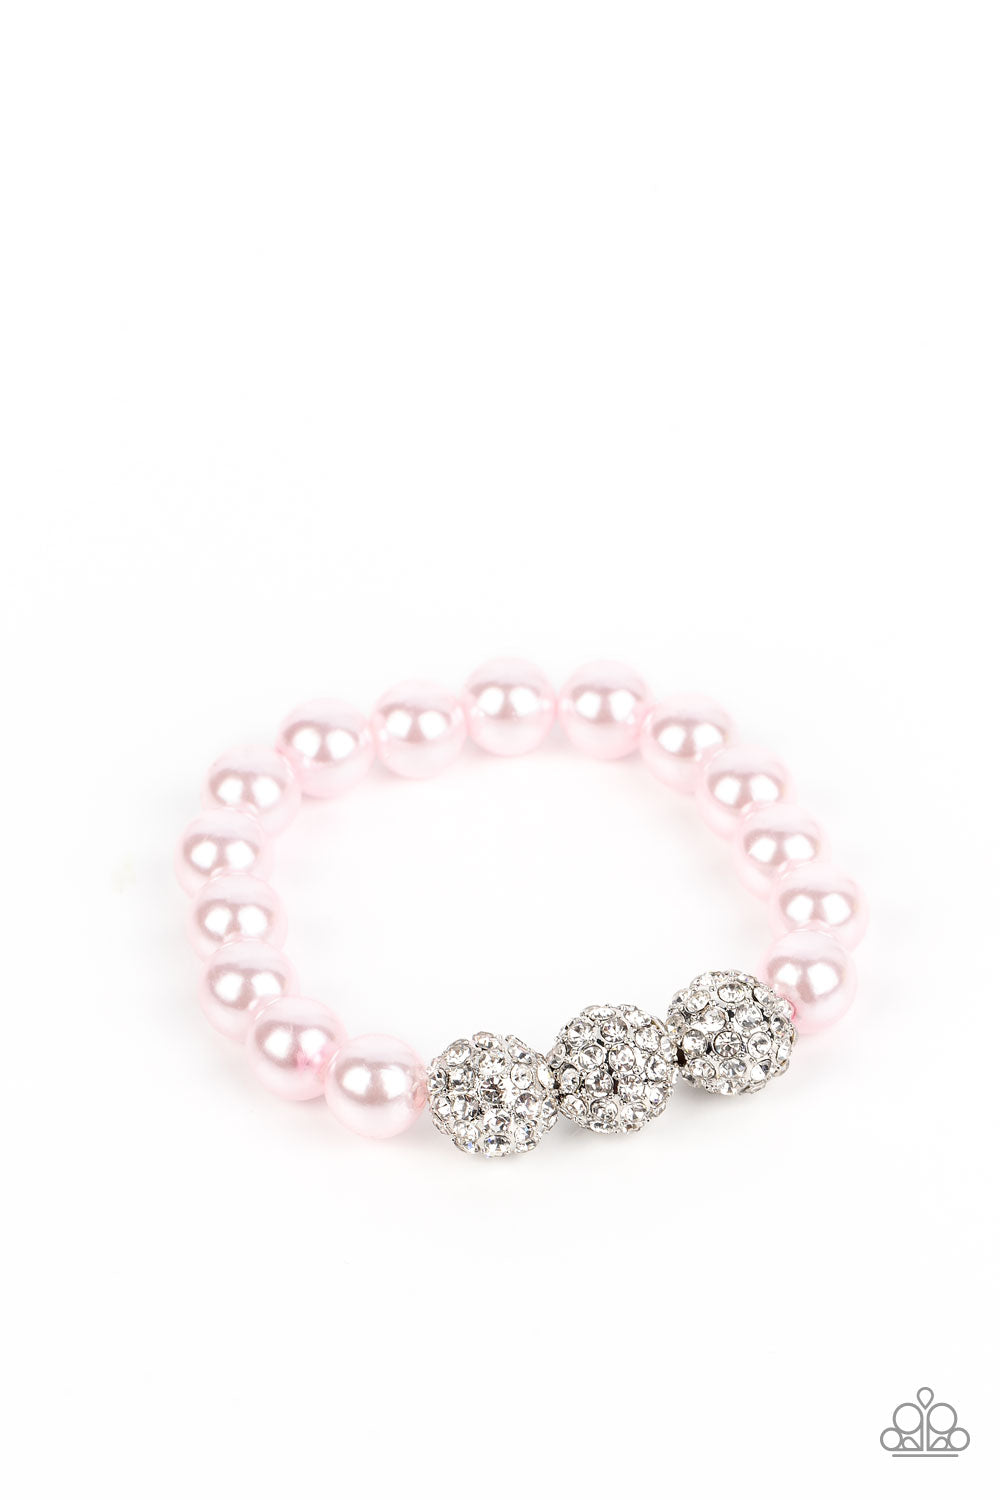 Breathtaking Ball Pink Pearl Bracelet - Paparazzi Accessories  A trio of silver beads encrusted in rhinestones is centered along a strand of classic baby pink pearls. The beads are threaded along a stretchy band, wrapping around the wrist in a refined finish.  Sold as one individual bracelet.  P9RE-PKXX-286XX